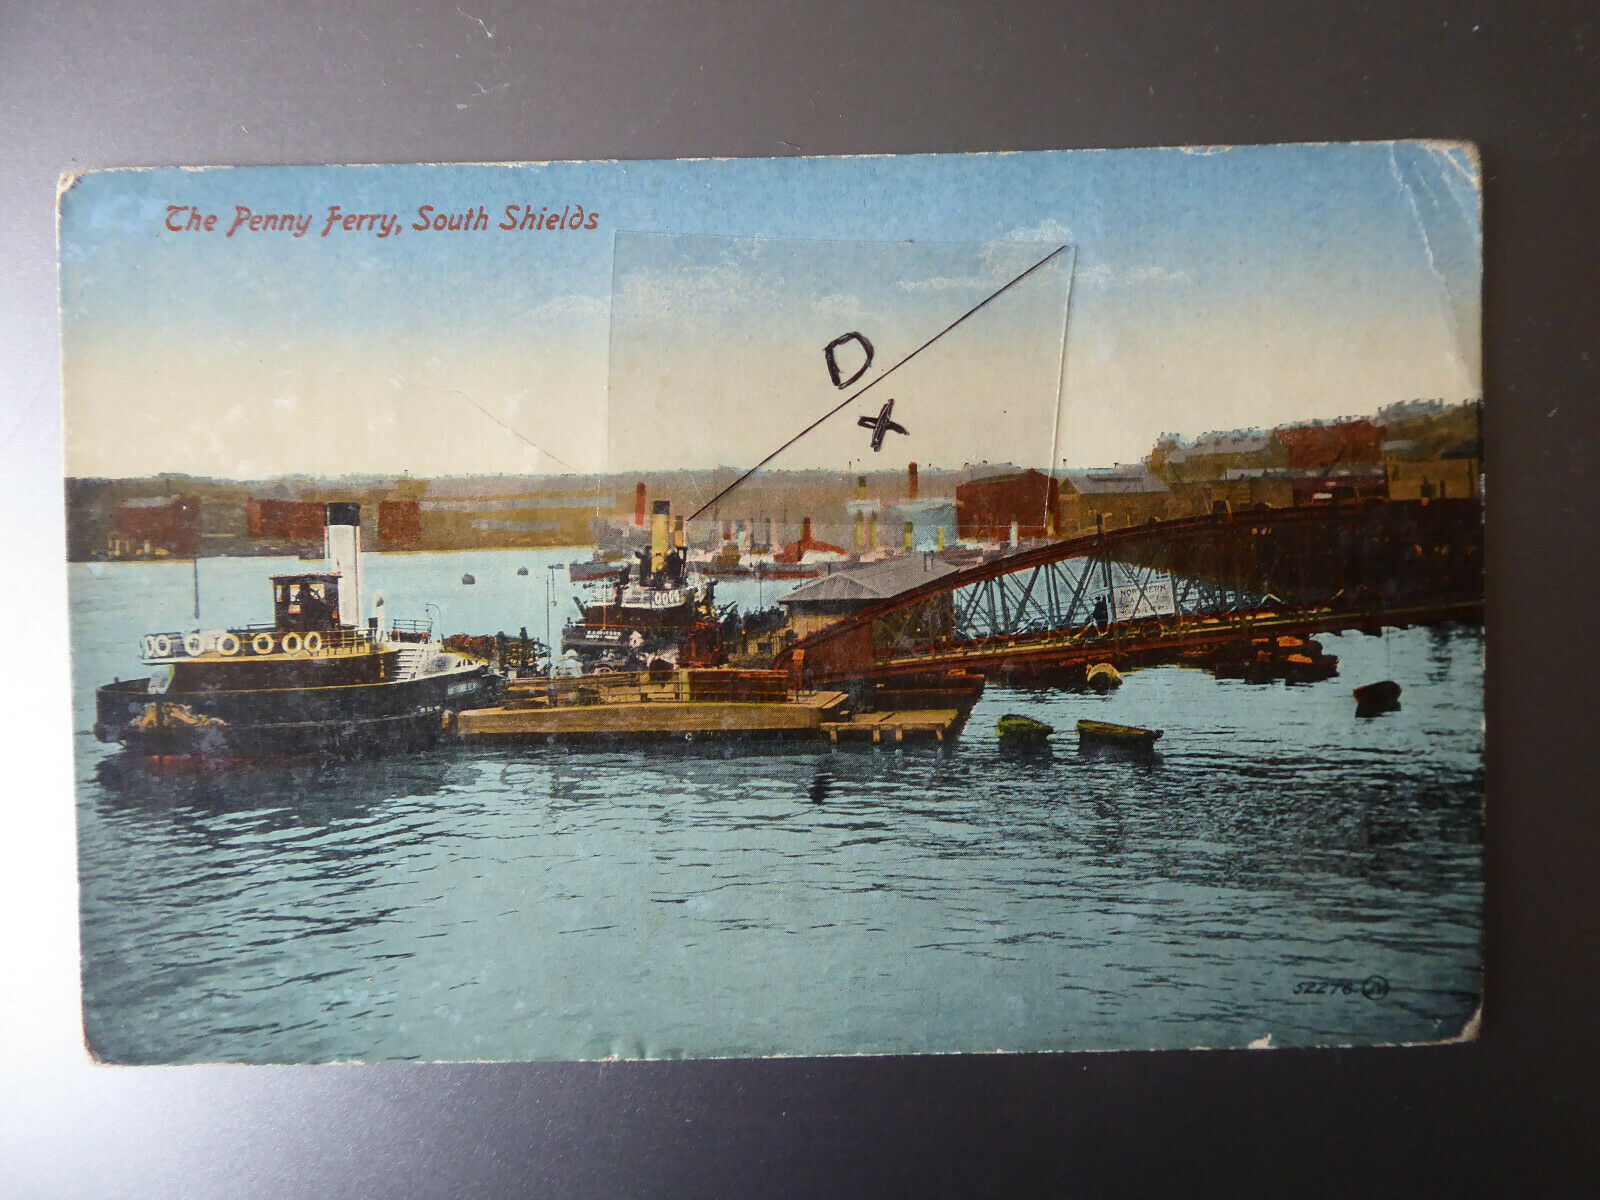 House Clearance - The Penny Ferry, South Shields